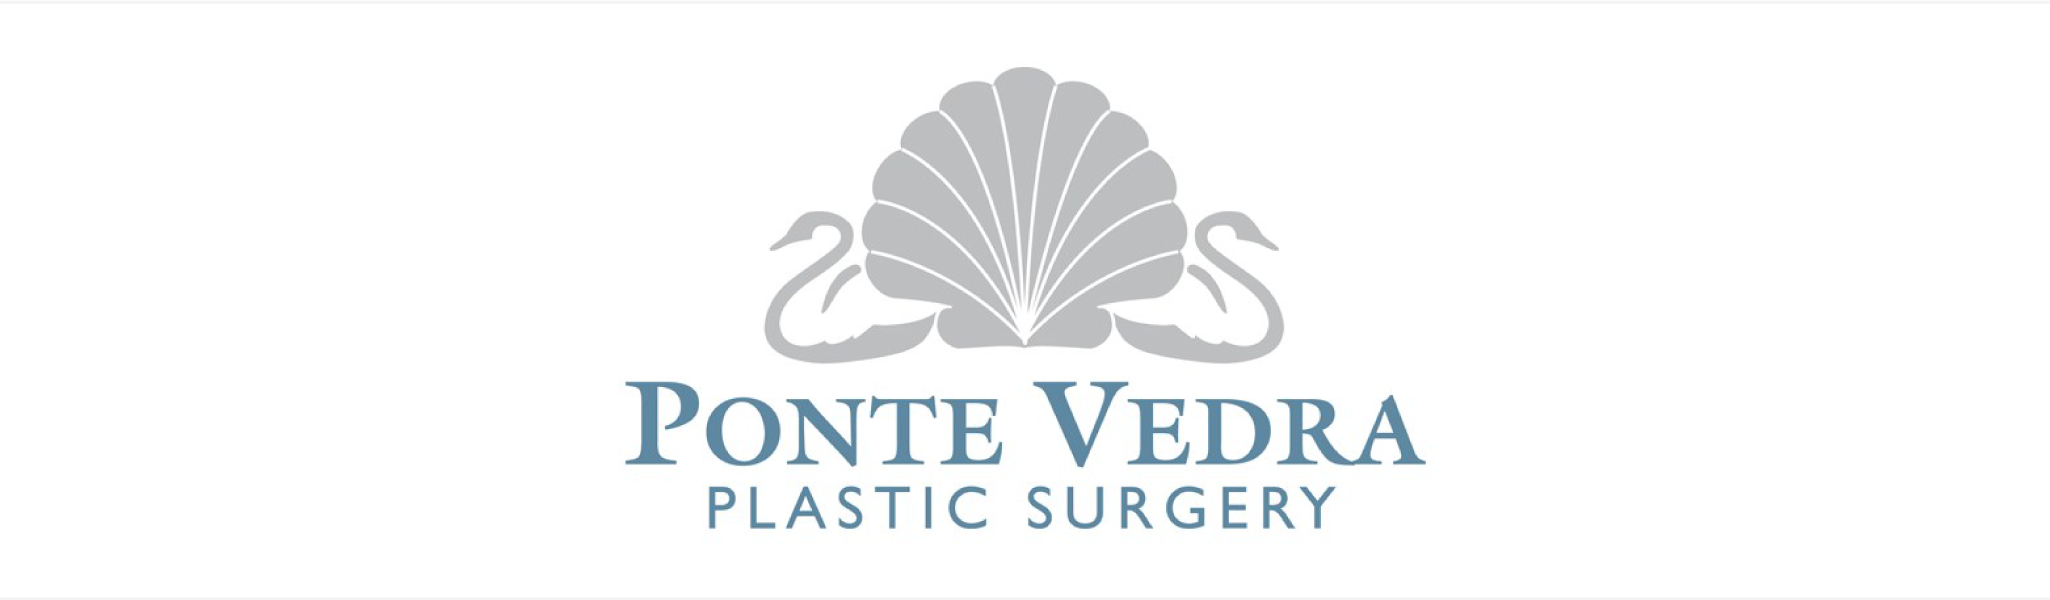 How Ponte Vedra Plastic Surgery Slashed Lead Conversion Times